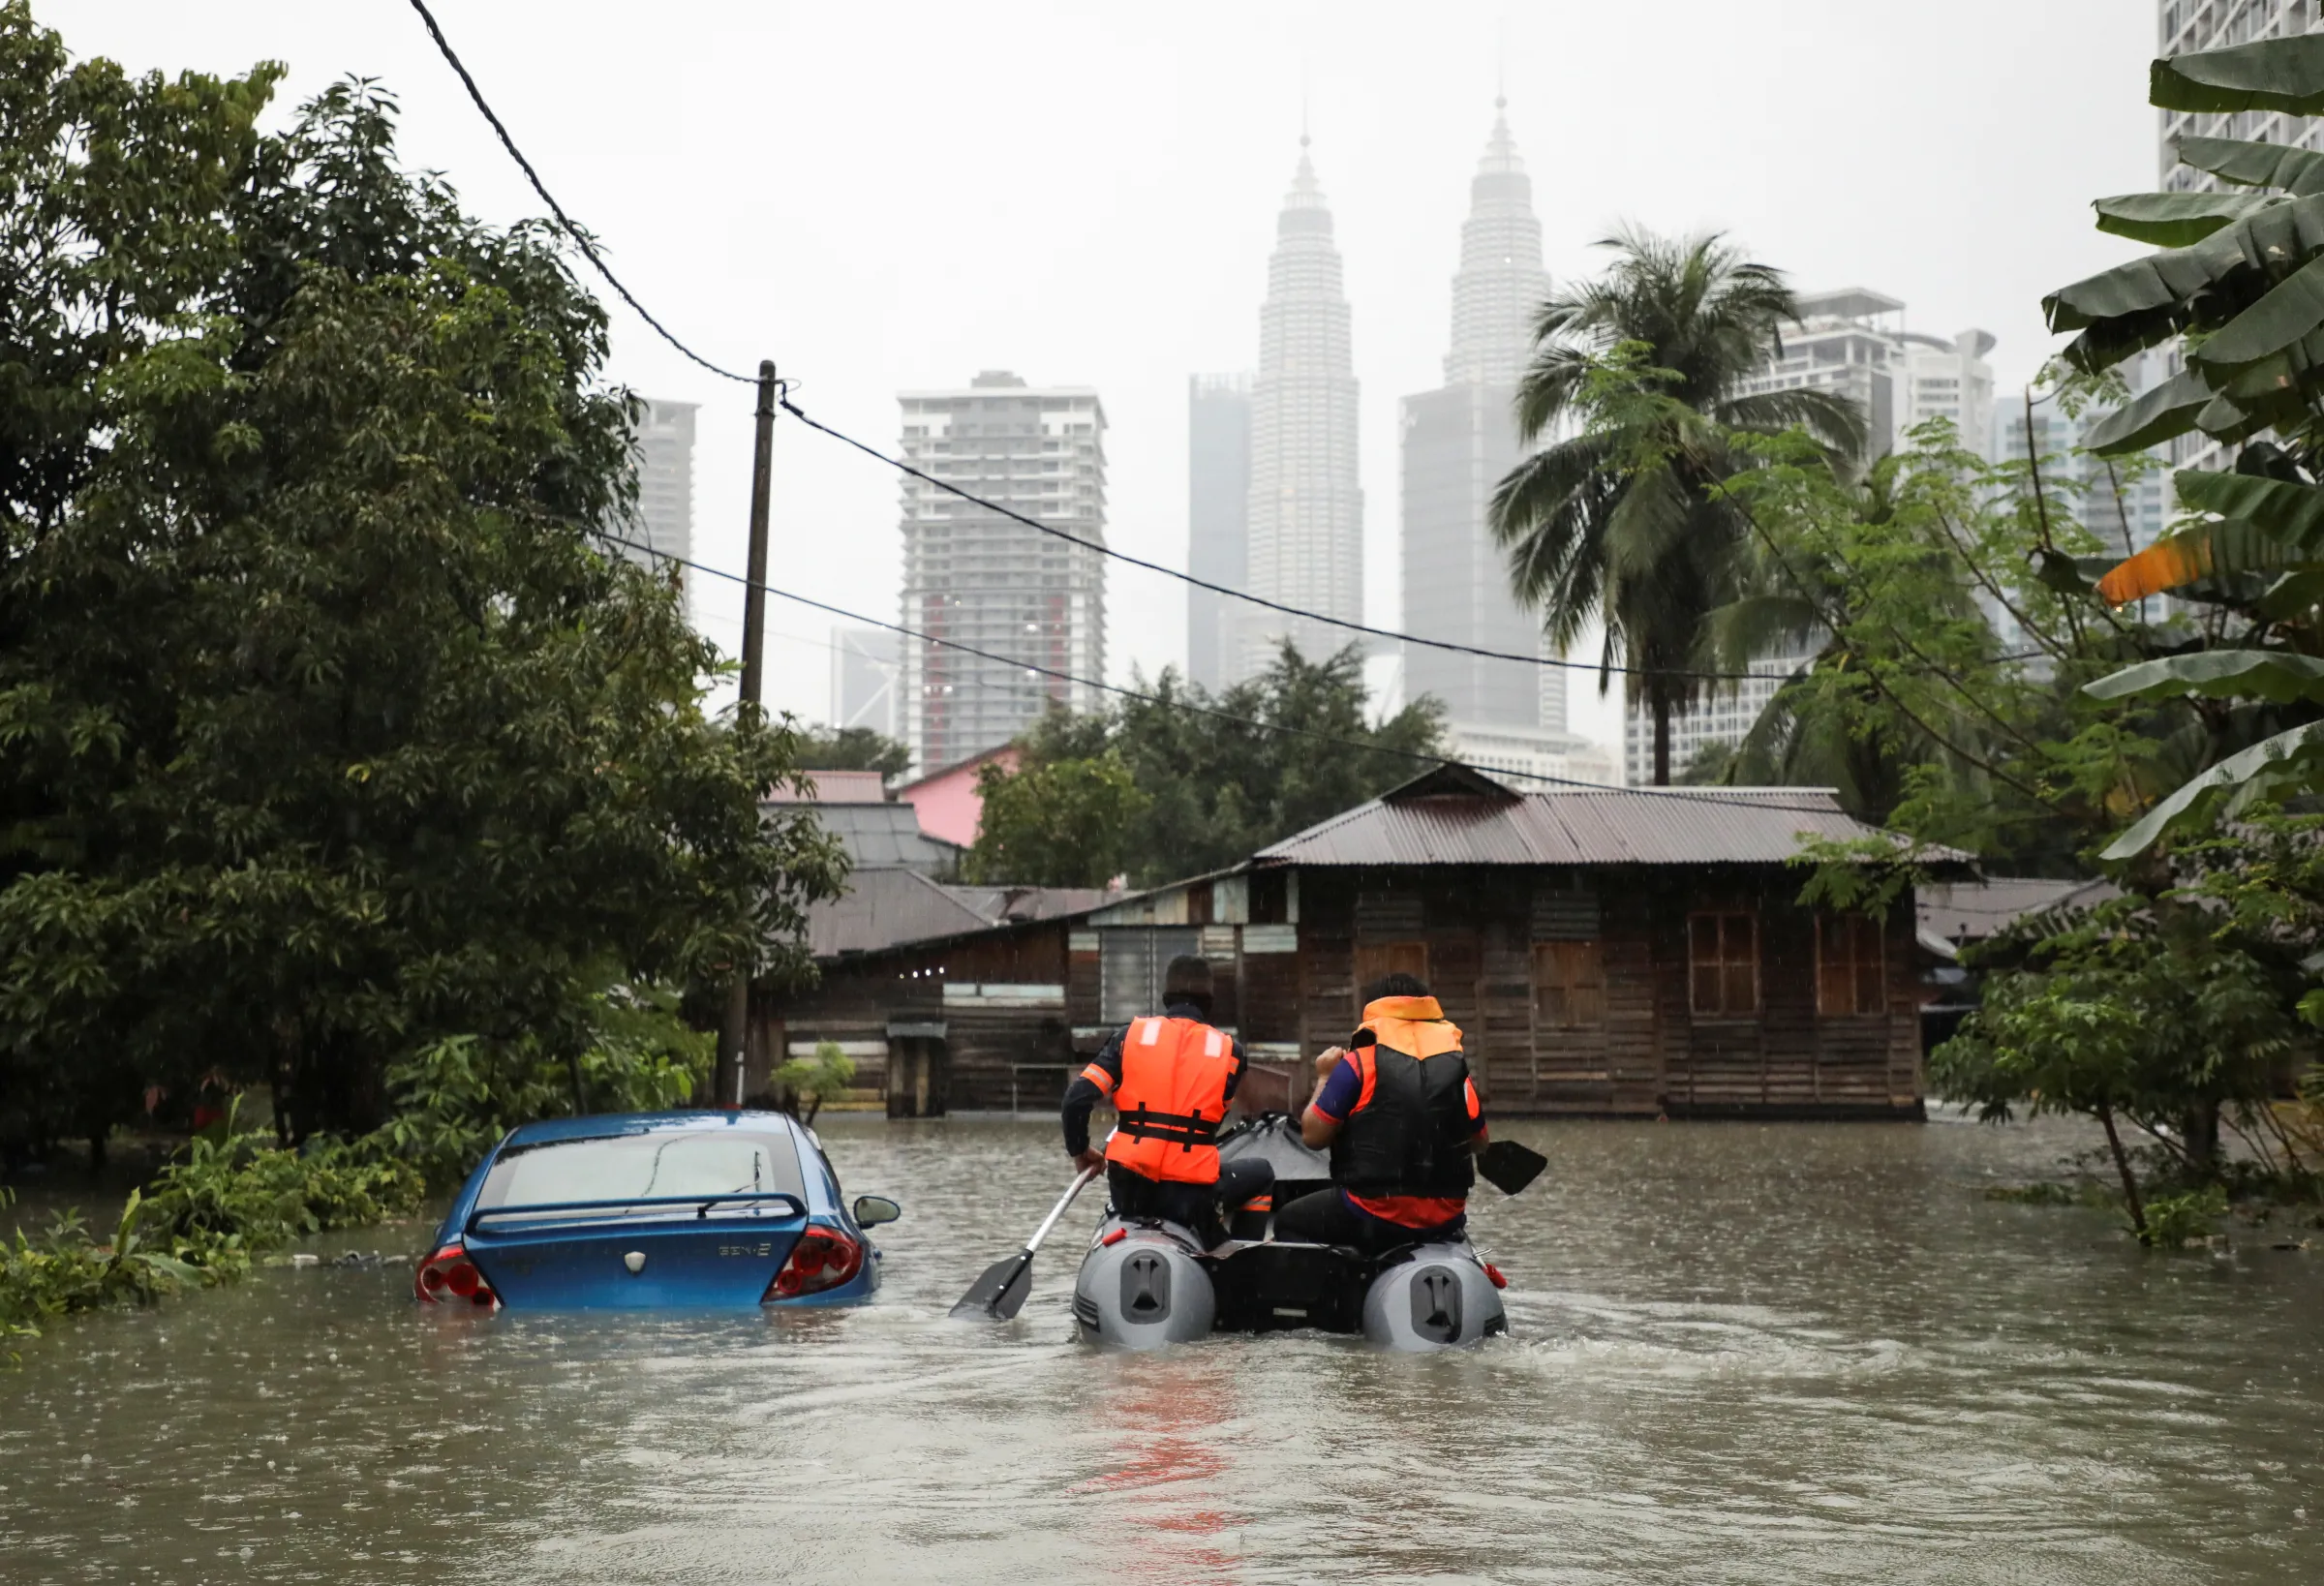 Malaysia Civil Defence Force members ride a boat to rescue the residents at a flooded area, following heavy rain fall in Kuala Lumpur, Malaysia, March 7, 2022. REUTERS / Hasnoor Hussain